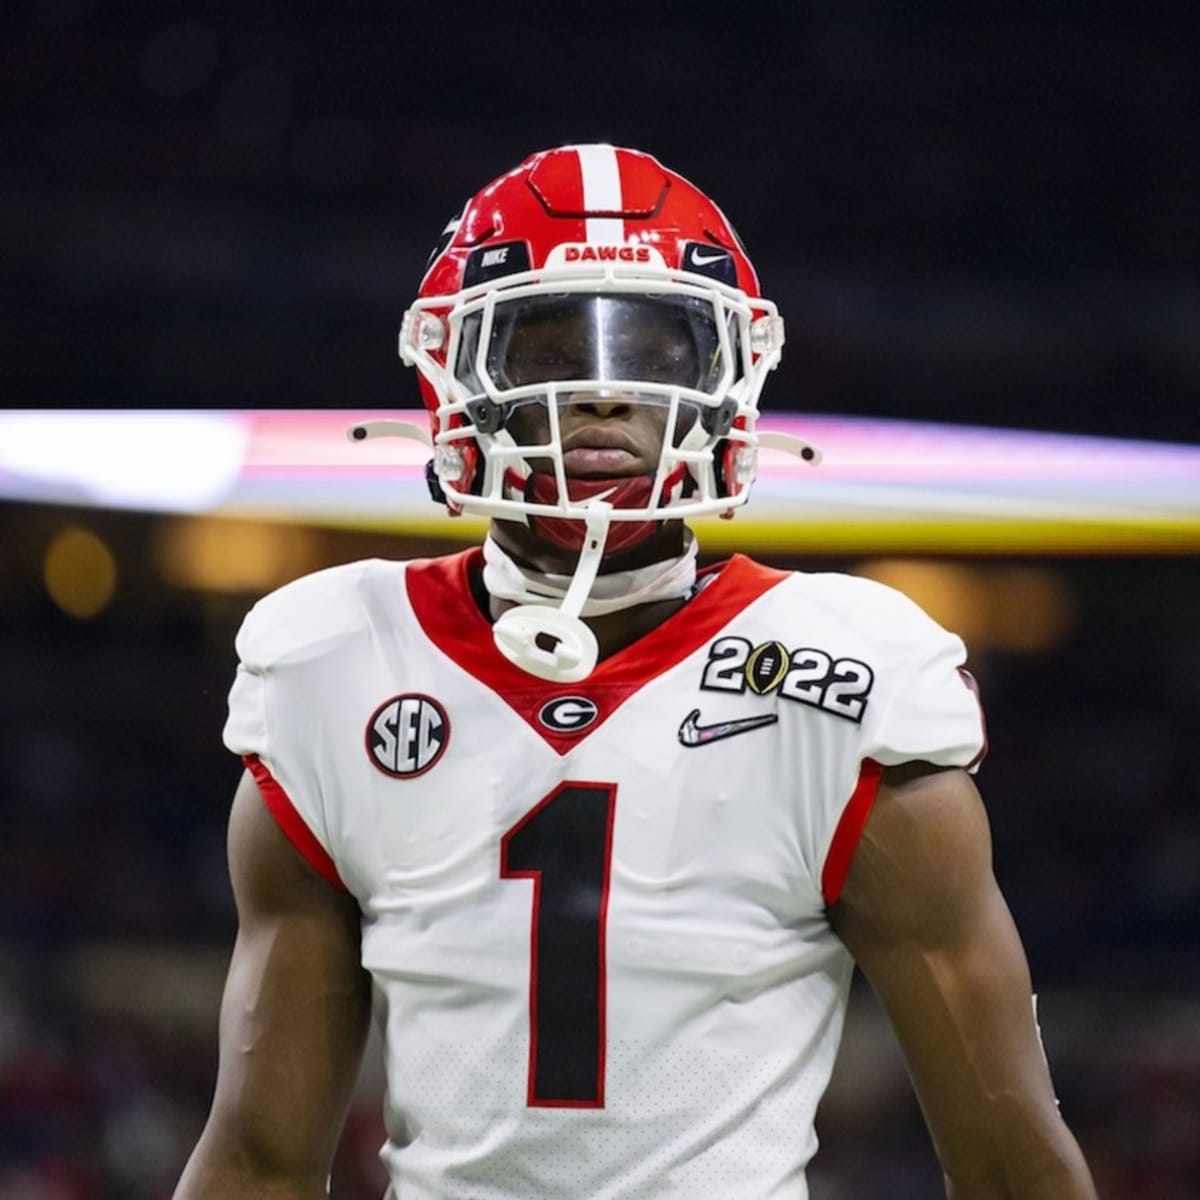 2022 NFL Draft Wide Receiver Rankings - Windy City Gridiron